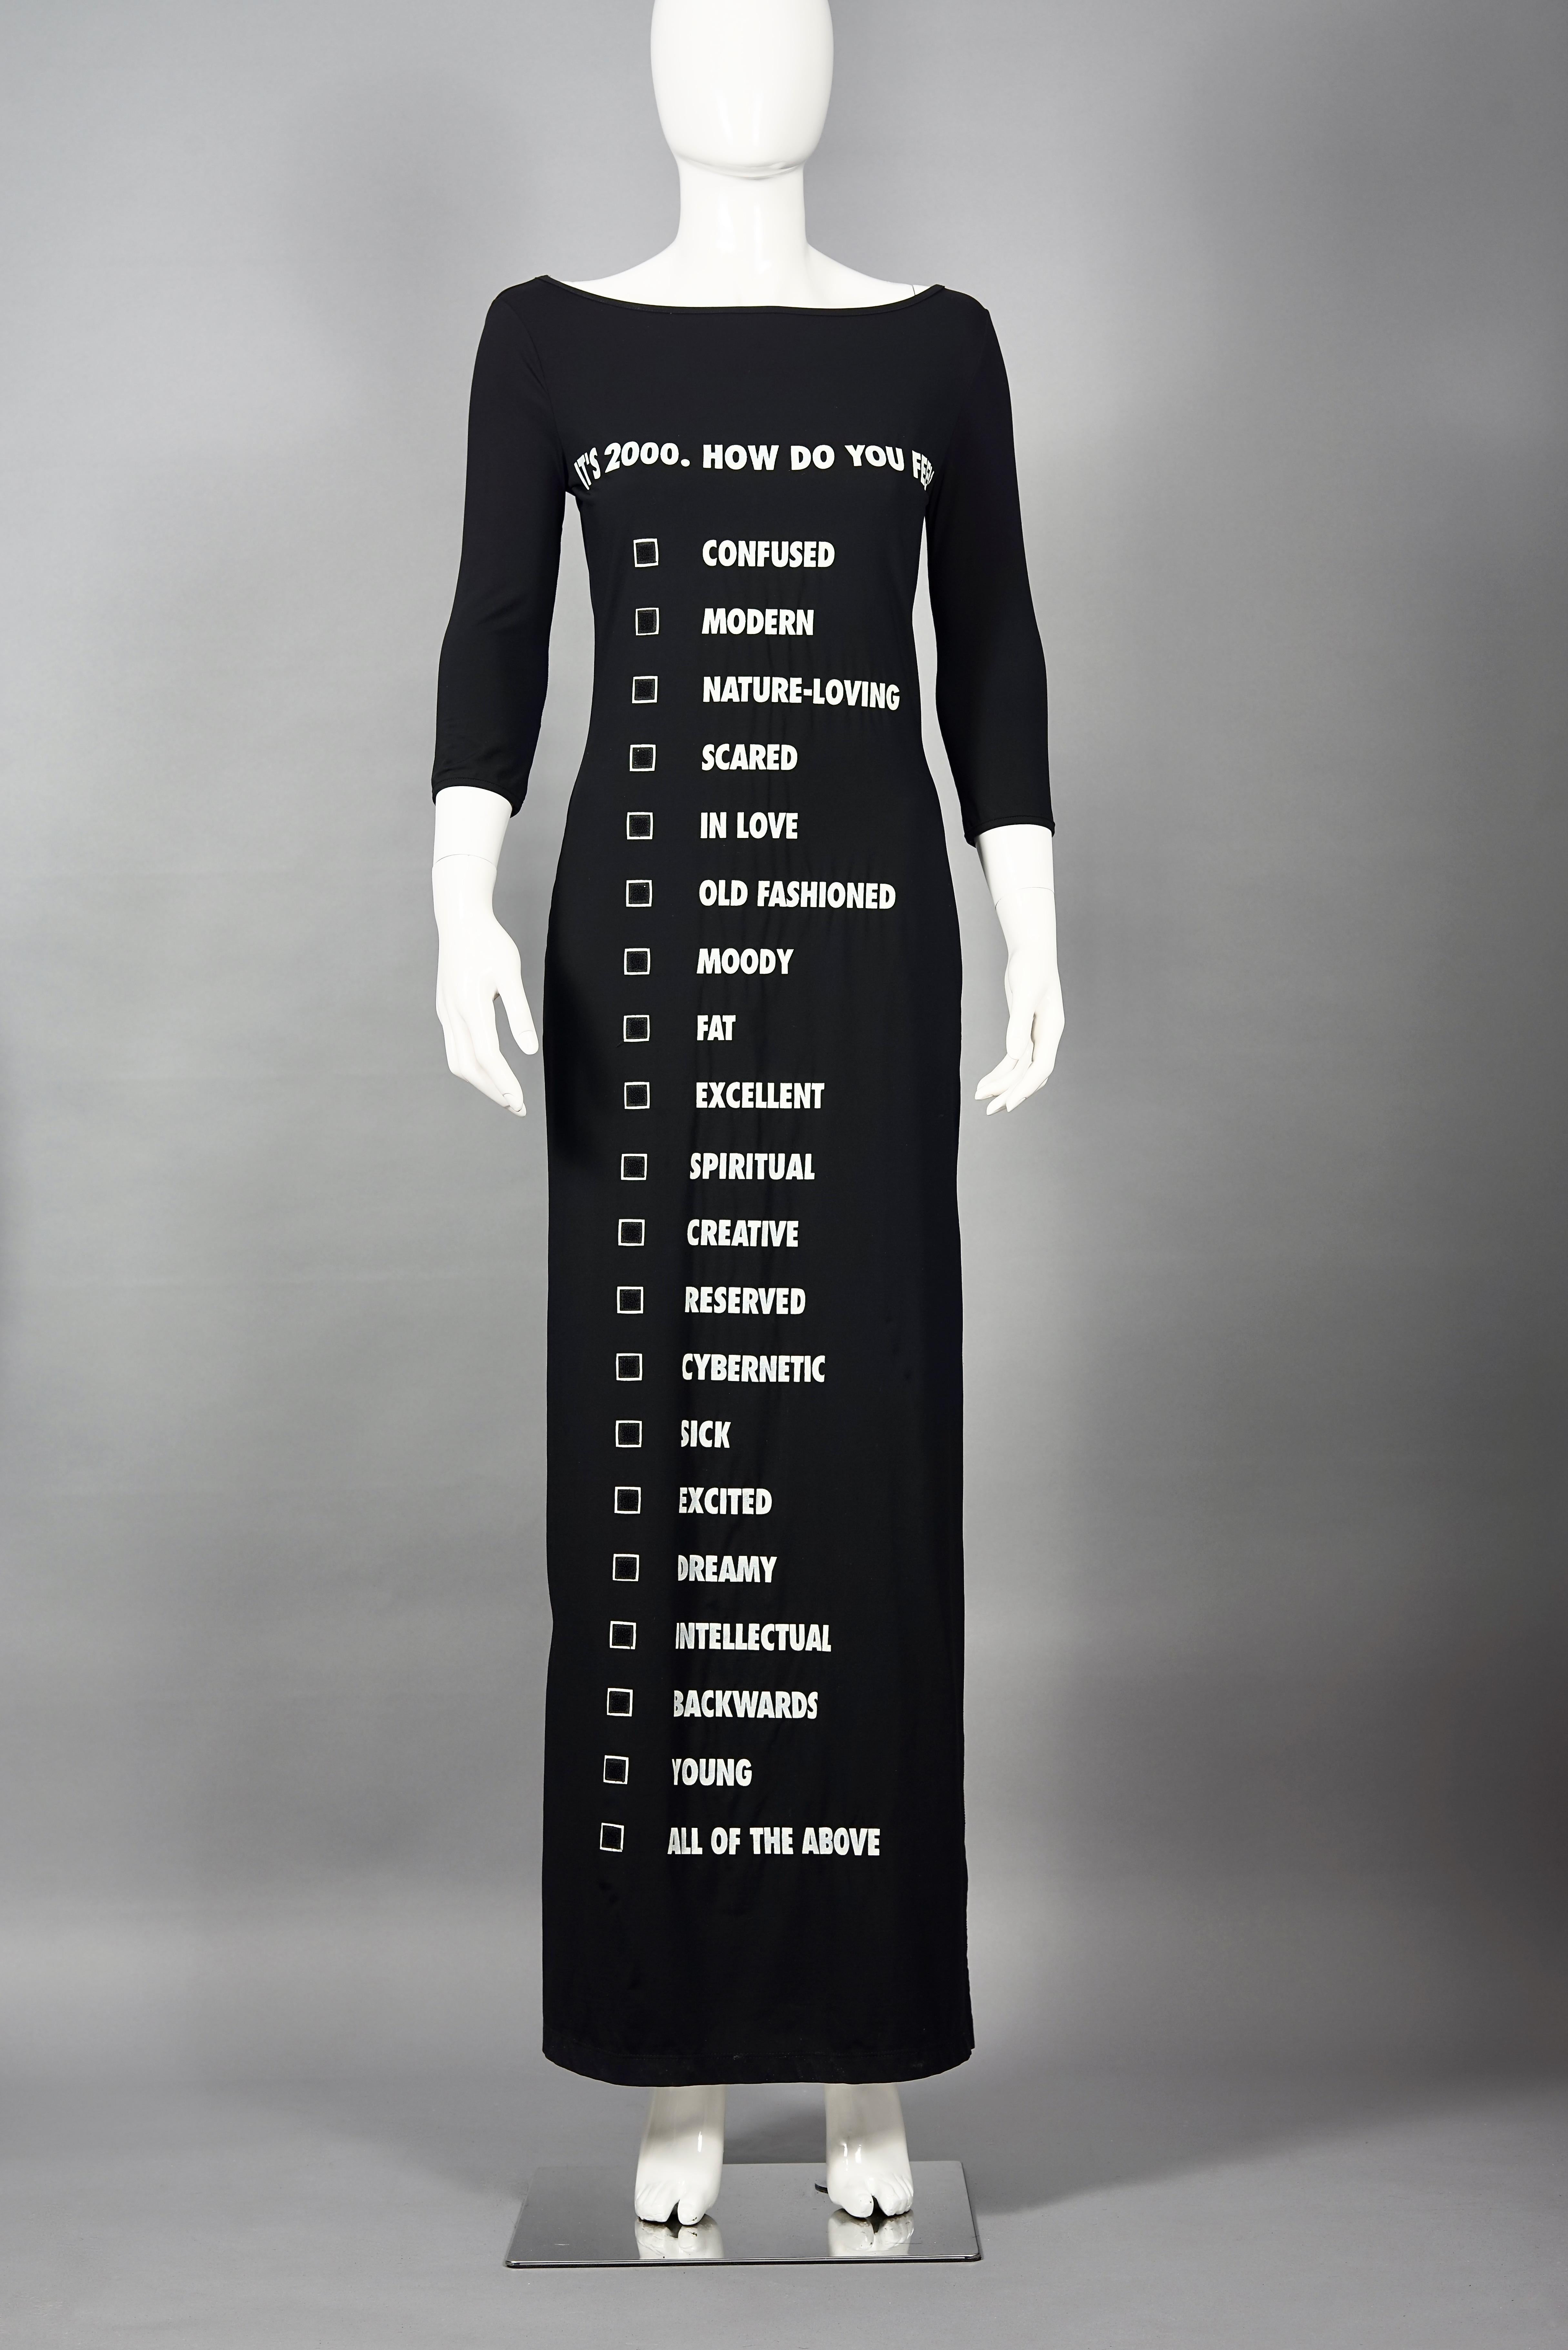 Vintage MOSCHINO Millenium Mood Checklist Maxi Dress

Measurements taken laid flat, please double bust, waist and hips:
Shoulder: 15.75 inches (40 cm)
Sleeves: 15.75 inches (40 cm)
Bust: 17.32 inches (44 cm)
Waist: 14.96 inches (38 cm) 
Hips: 17.32